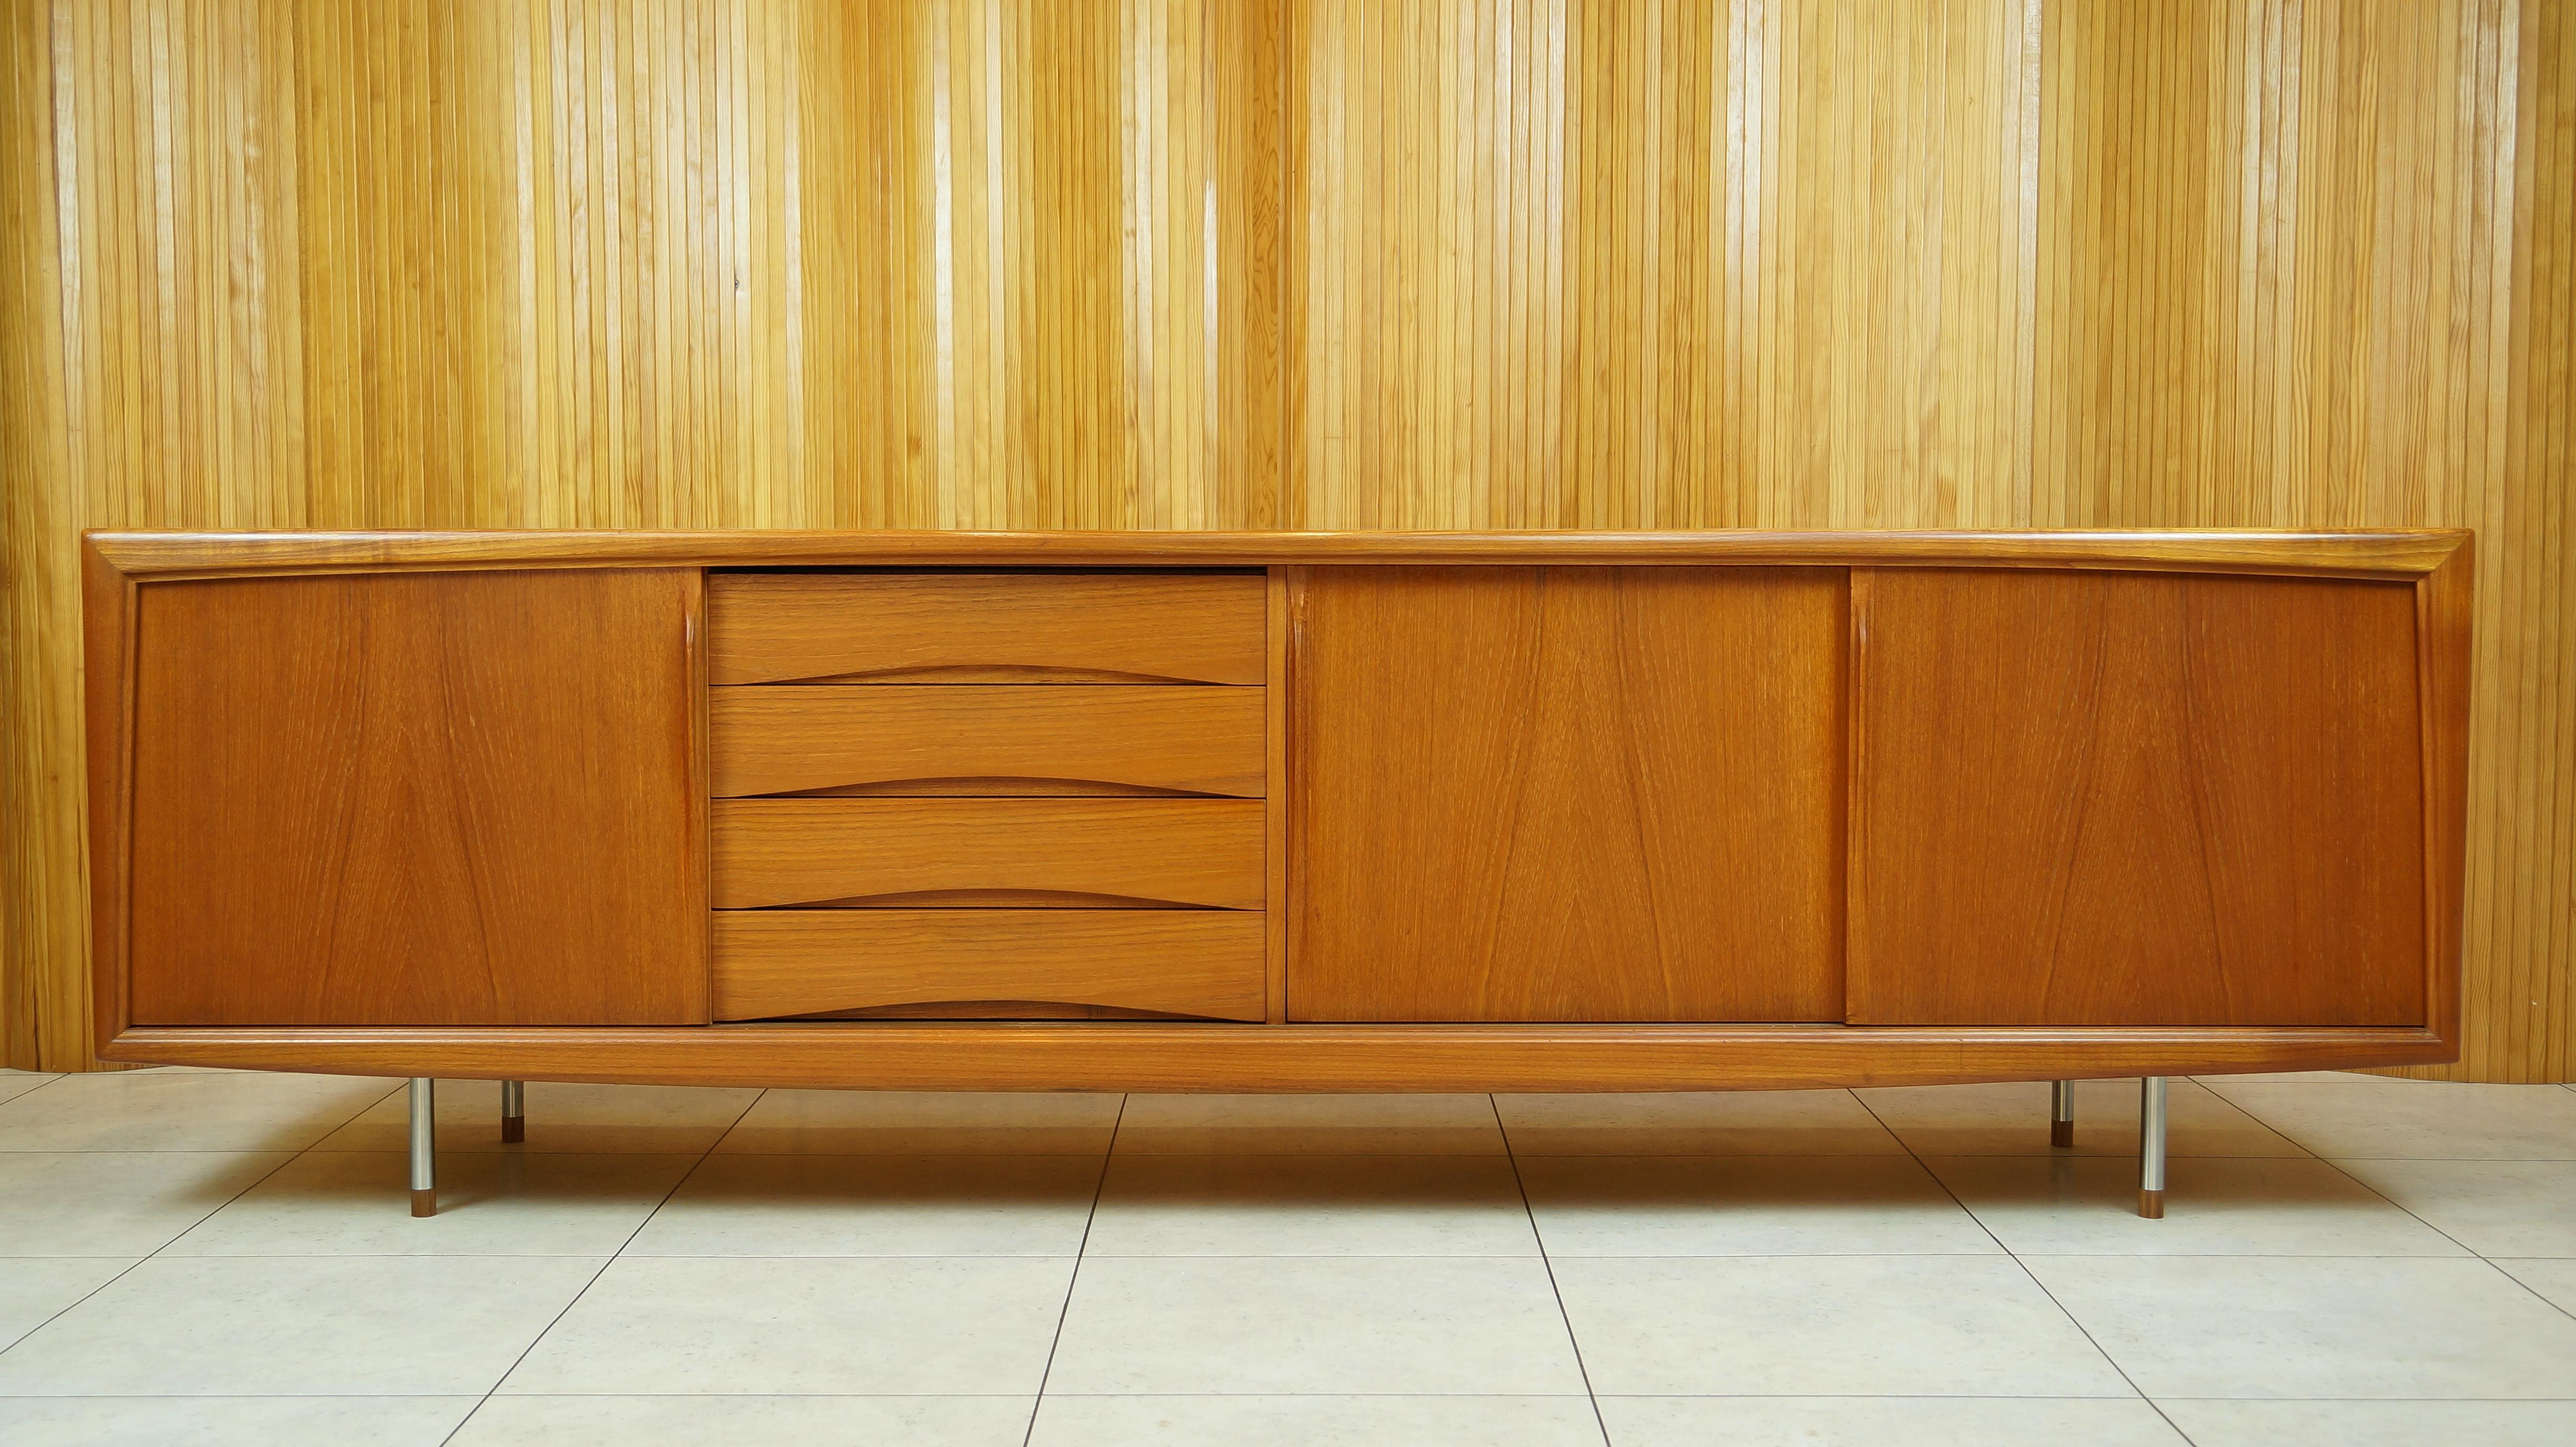 Vintage retro teak Danish sideboard or credenza
Design by: Gunni Omann for Axel Christensen Odder (ACO Mobler)
Denmark, 1960s.

Highly sought after version of this very high quality case piece with timeless design. 
This example is offered in